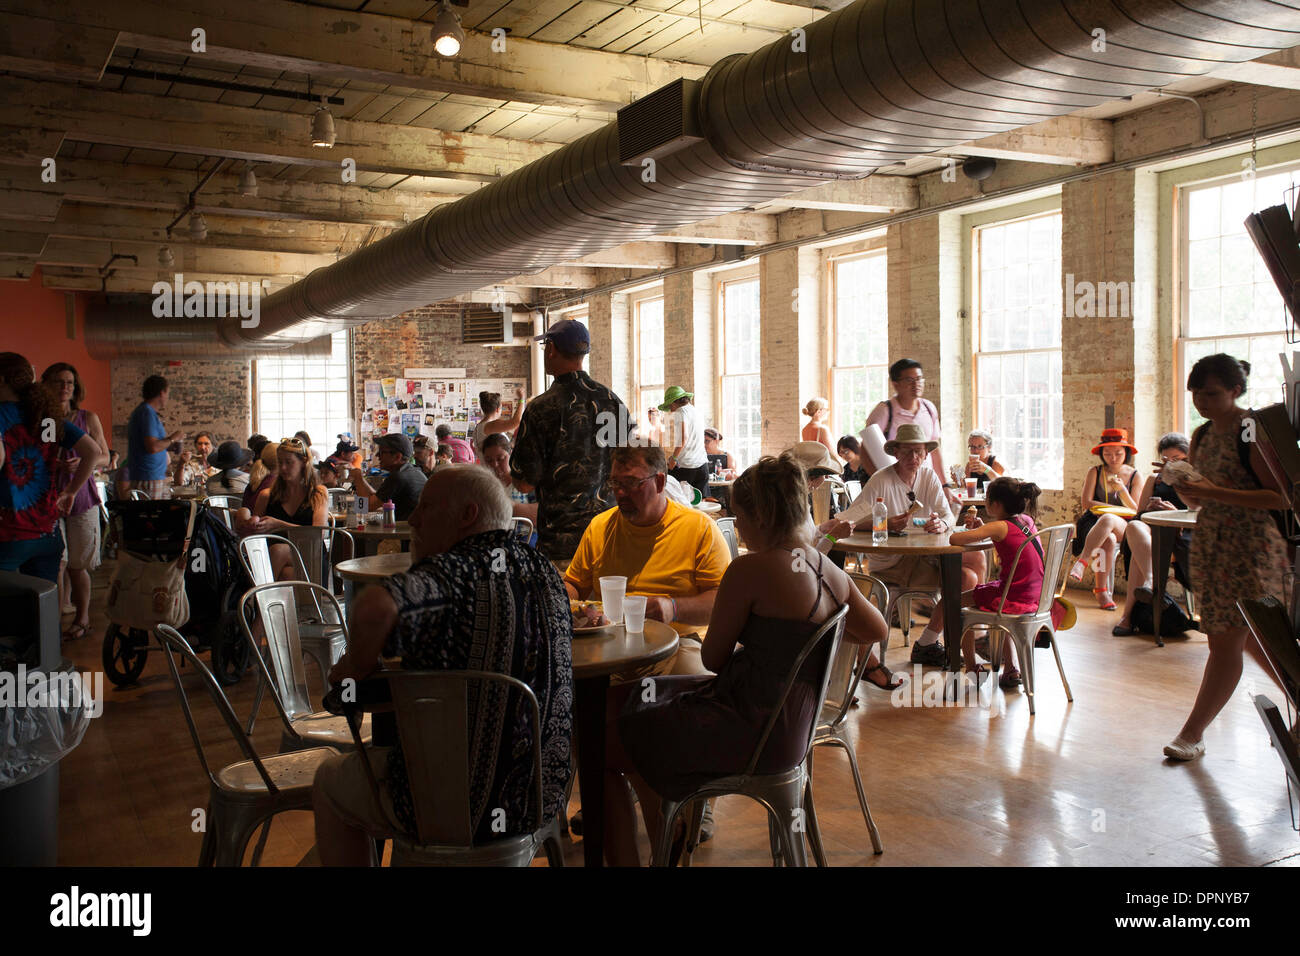 Dining area inside Mass MoCA [Massachusetts Museum of Contemporary Art] in North Adams Massachusetts filled with Wilco fans. Stock Photo